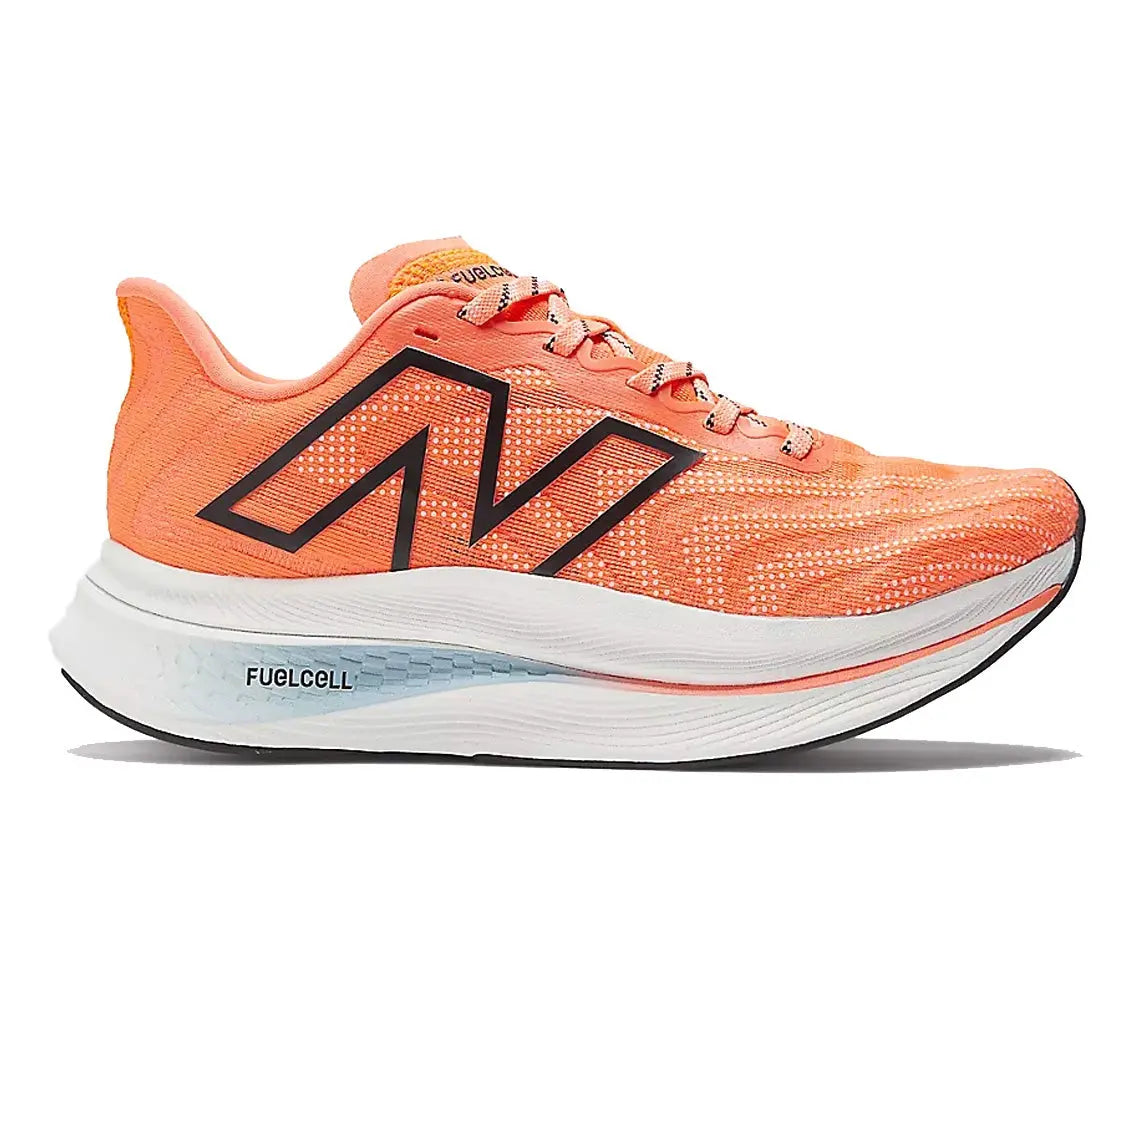 Womens New Balance FuelCell Supercomp Trainer v2 - Neon Dragonfly / Black